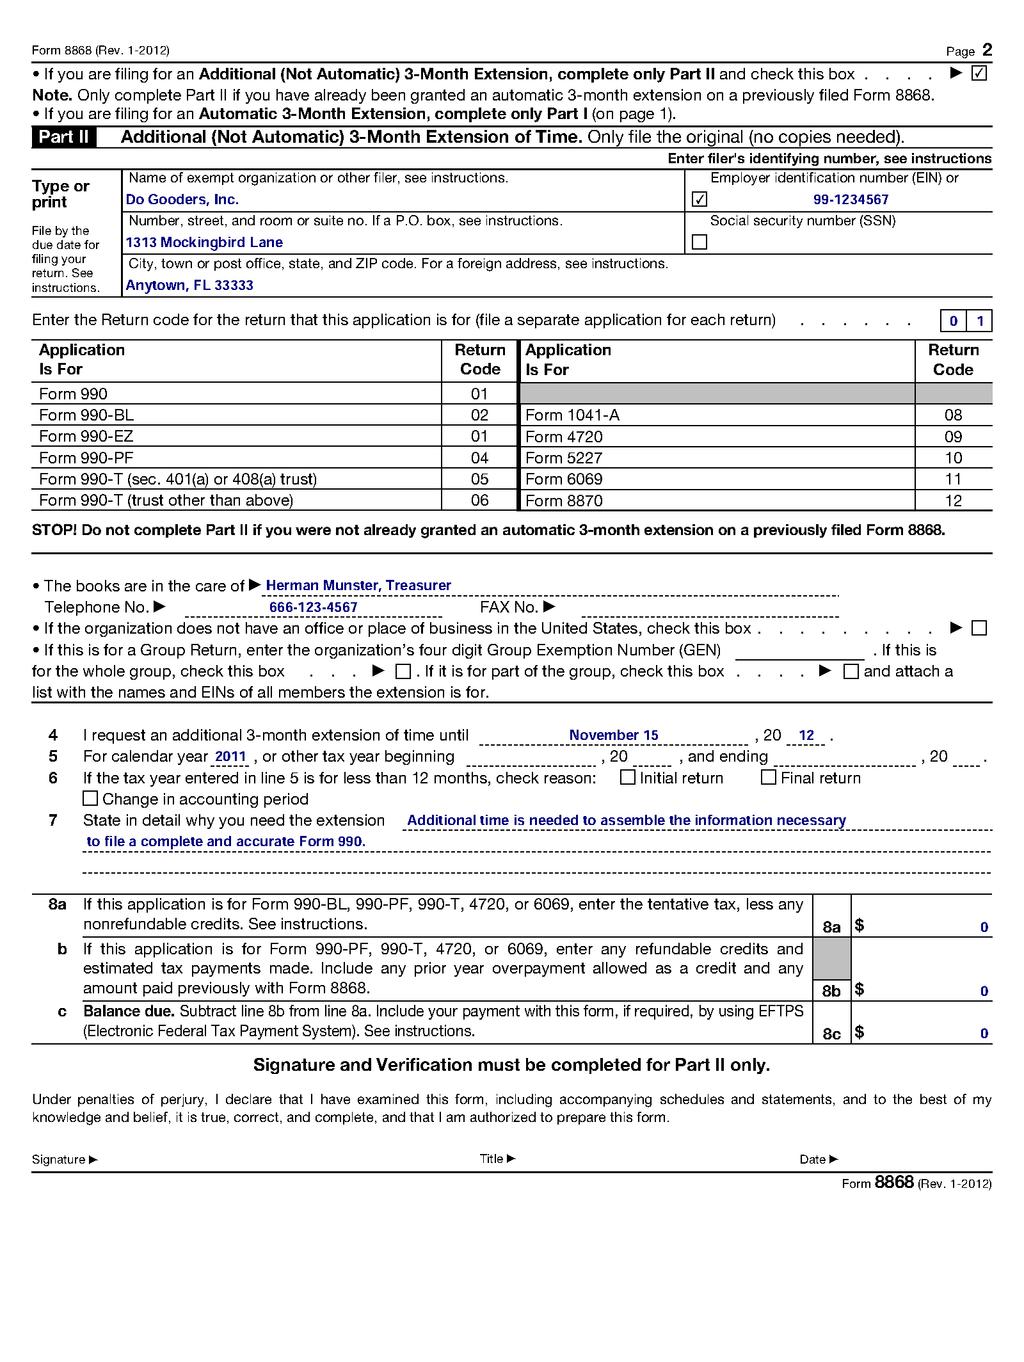 Below is an example of a filled-in page 2 of Form 9968 to request an additional 3 month extension of time to file Form 990.